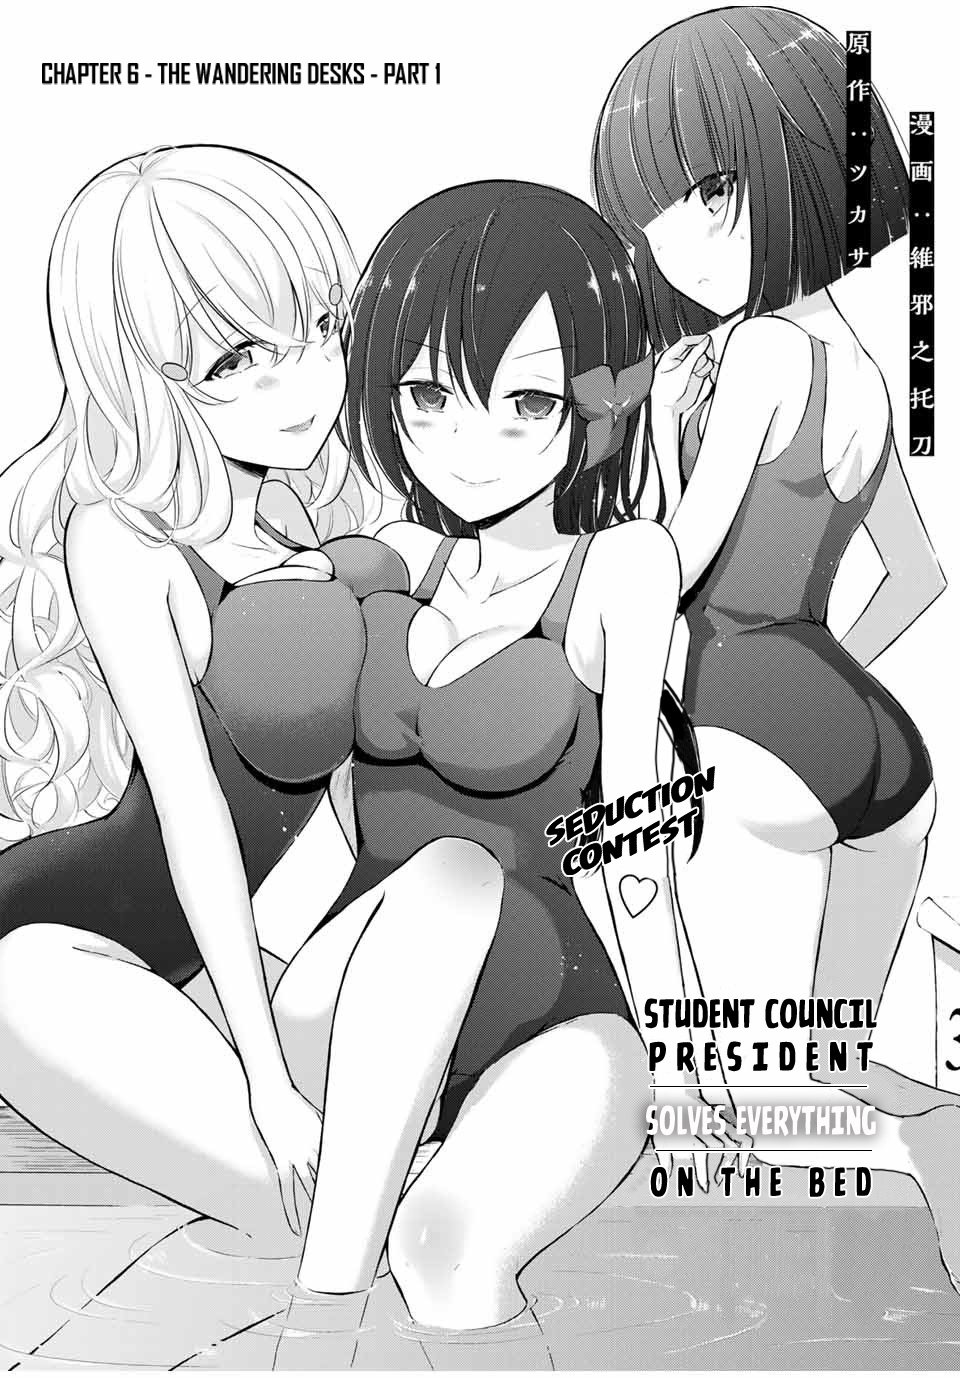 The Student Council President Solves Everything On The Bed Chapter 6.1 #4